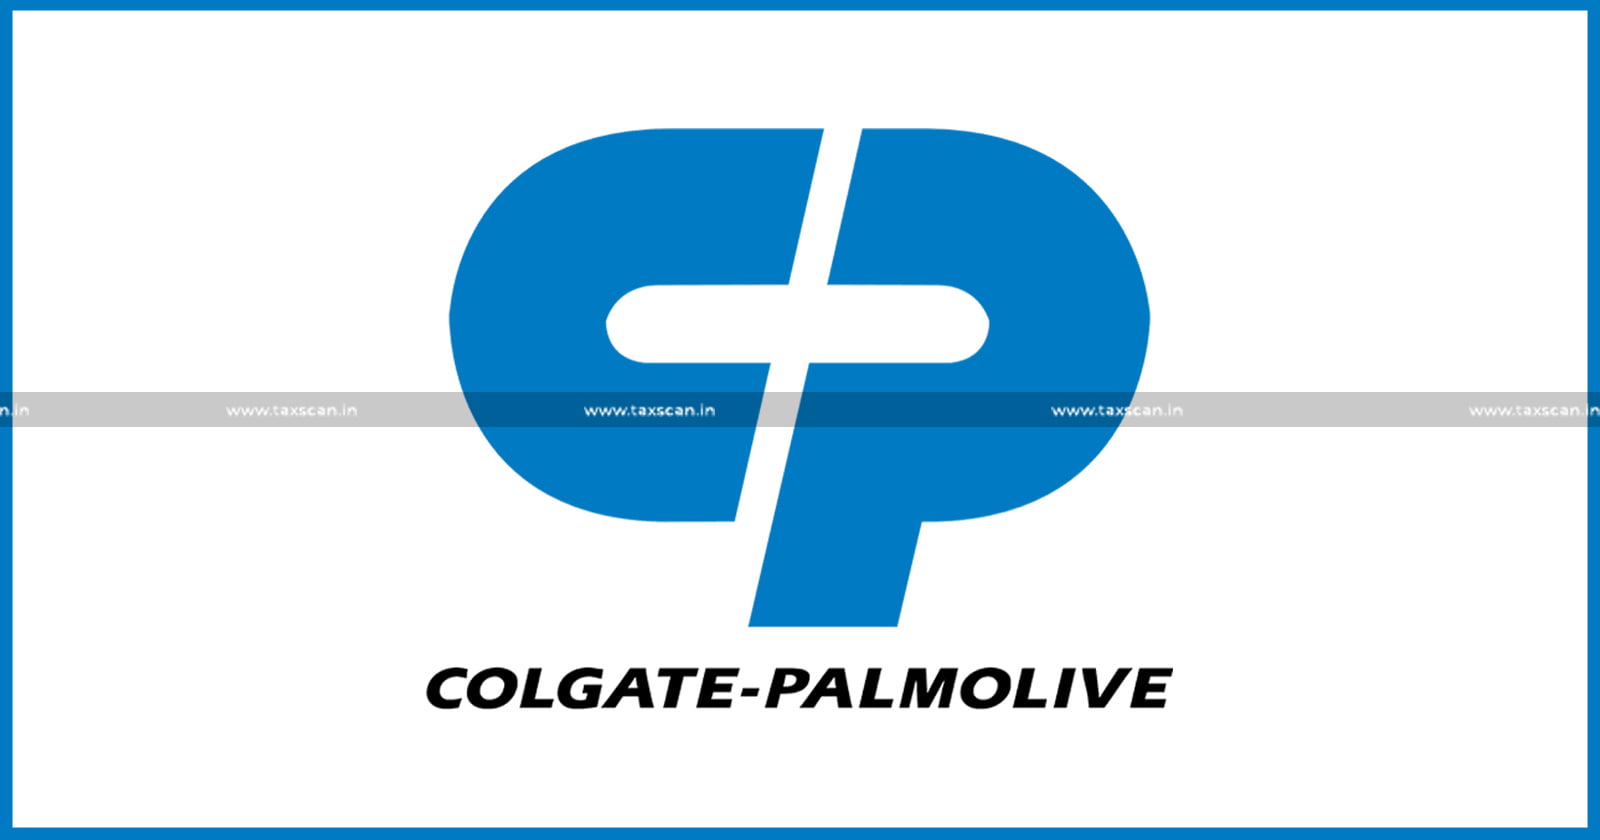 MBA Vacancy in Colgate-Palmolive Company - MBA Vacancy - Colgate-Palmolive Company careers - Colgate-Palmolive Company jobs for MBA graduates - taxscan